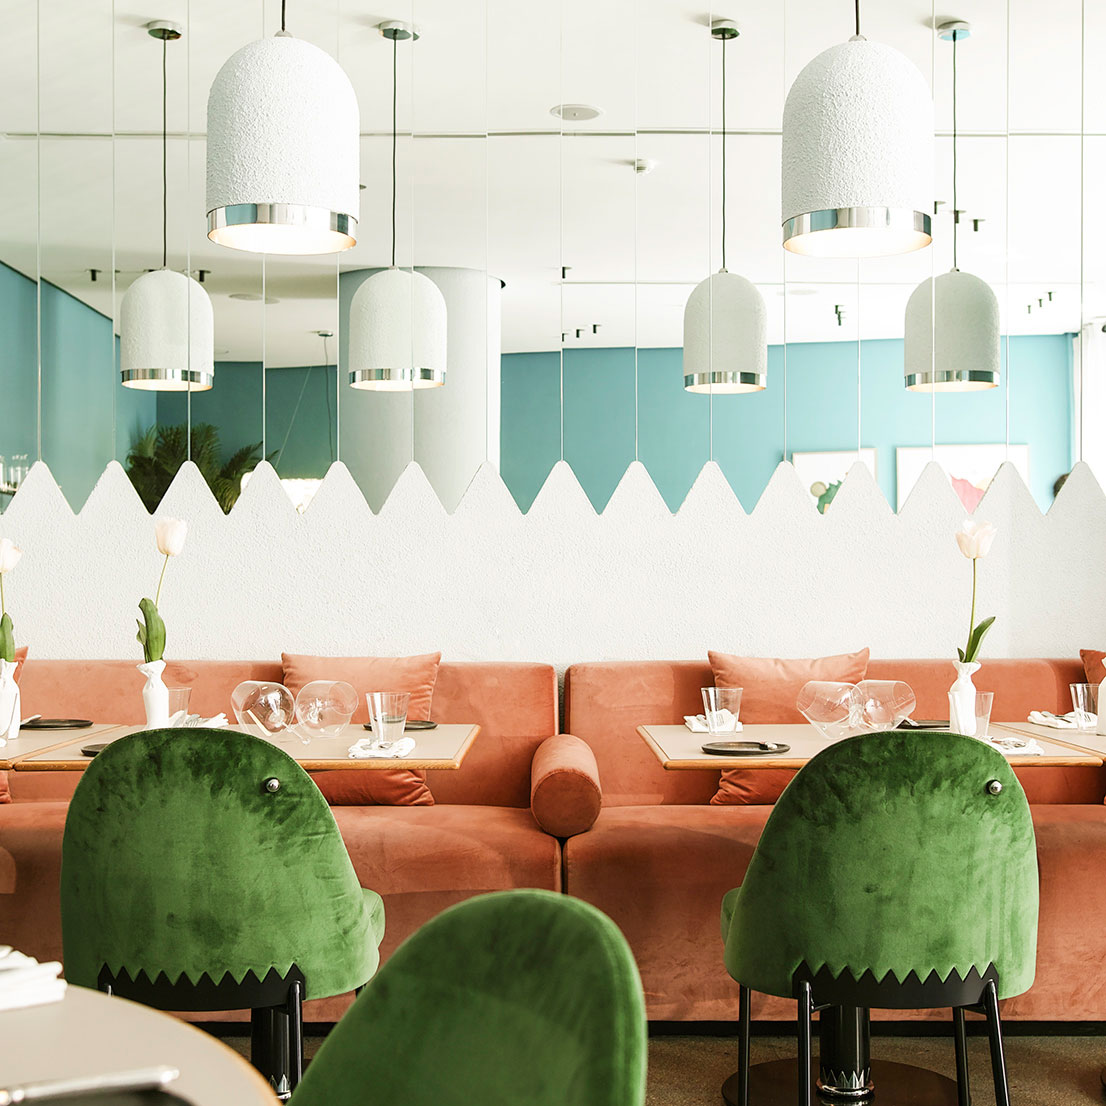 Stepping Inside Kaléo- A Dreamy Restaurant with Mid-Century Furniture